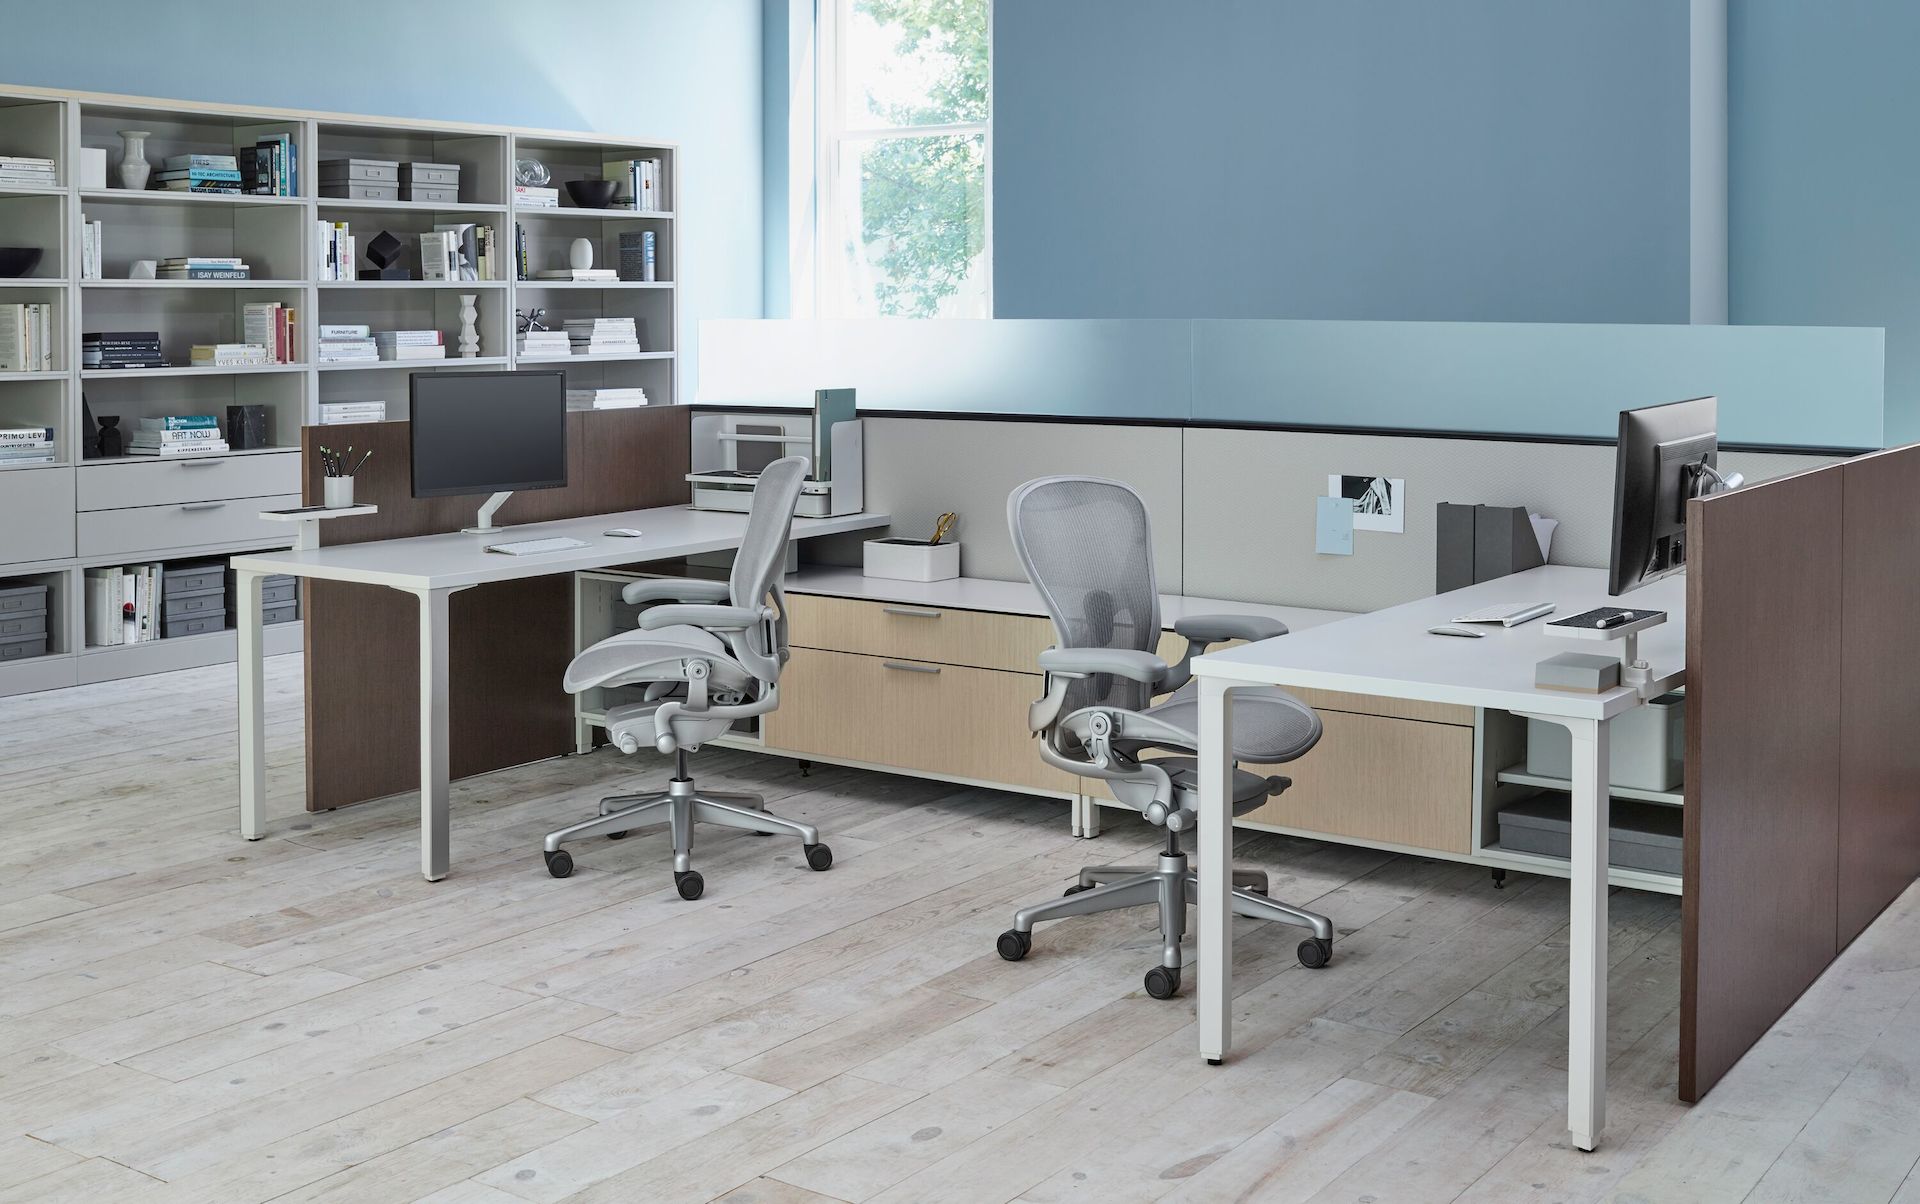 Aeron Chairs with Canvas Office Landscape - Herman Miller